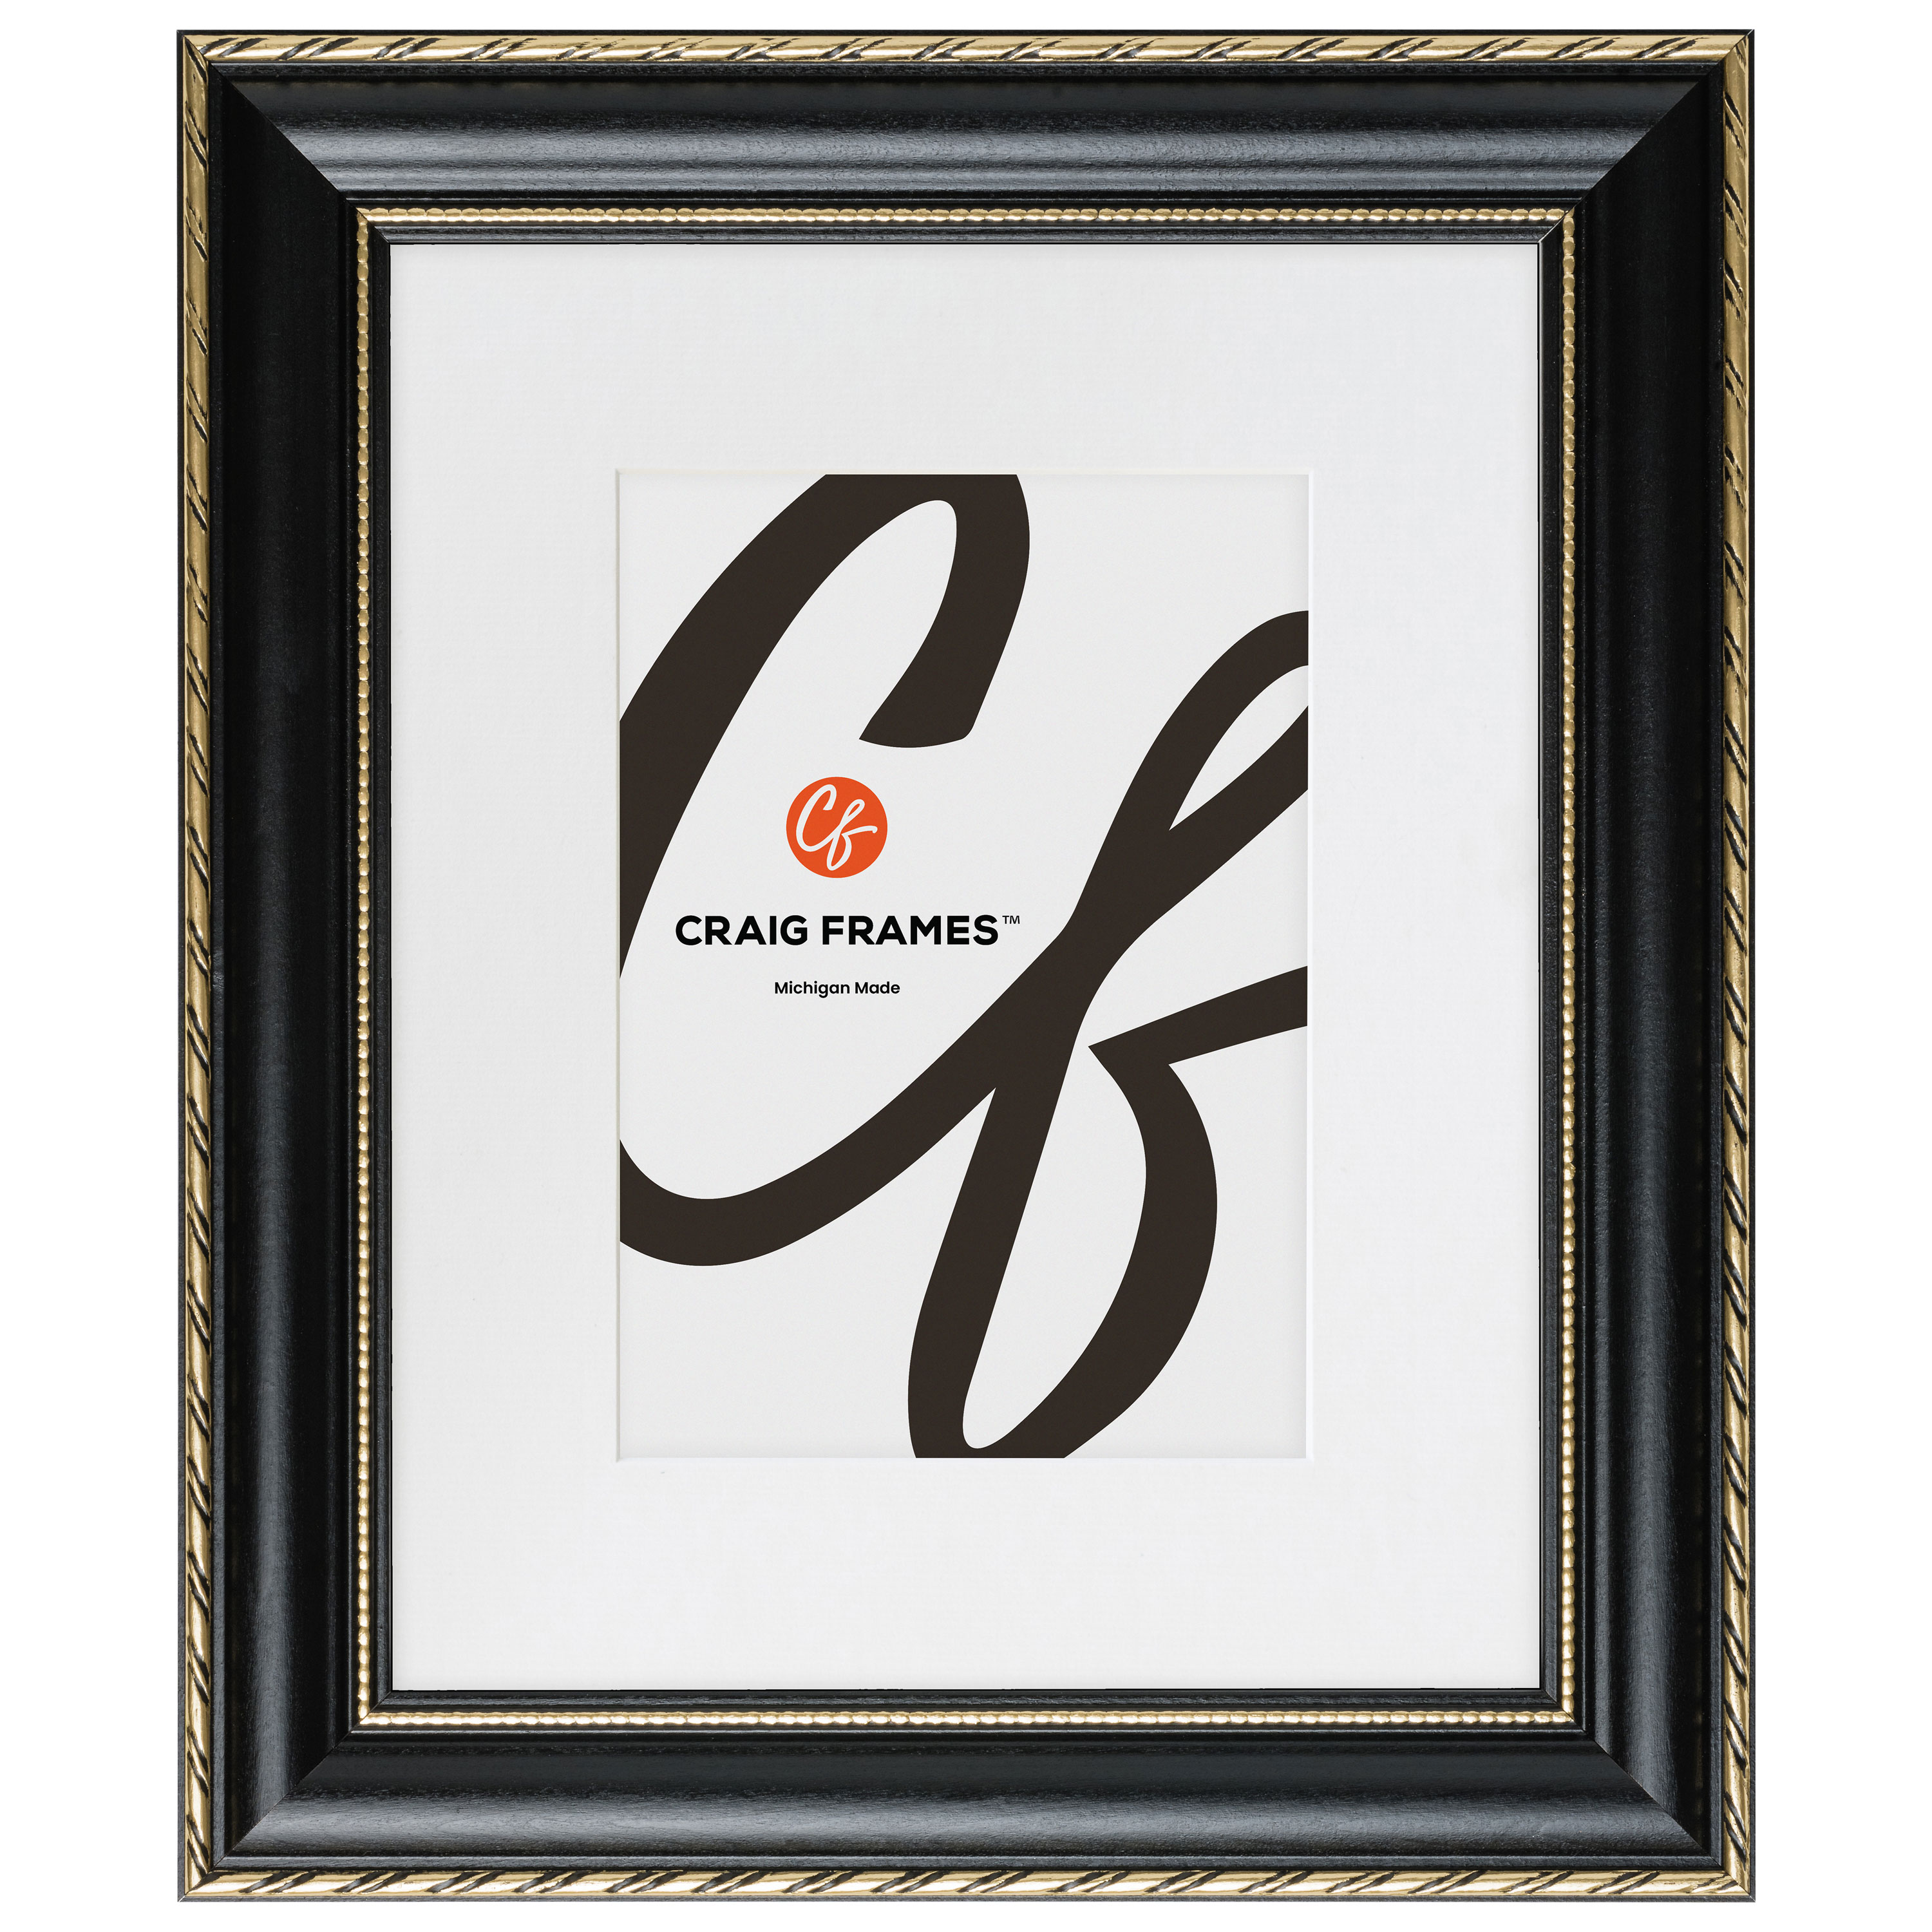 Craig Frames 314GD 5 x 7 inch Ornate Gold Picture Frame Matted to Display A 4 x 6 inch Photo